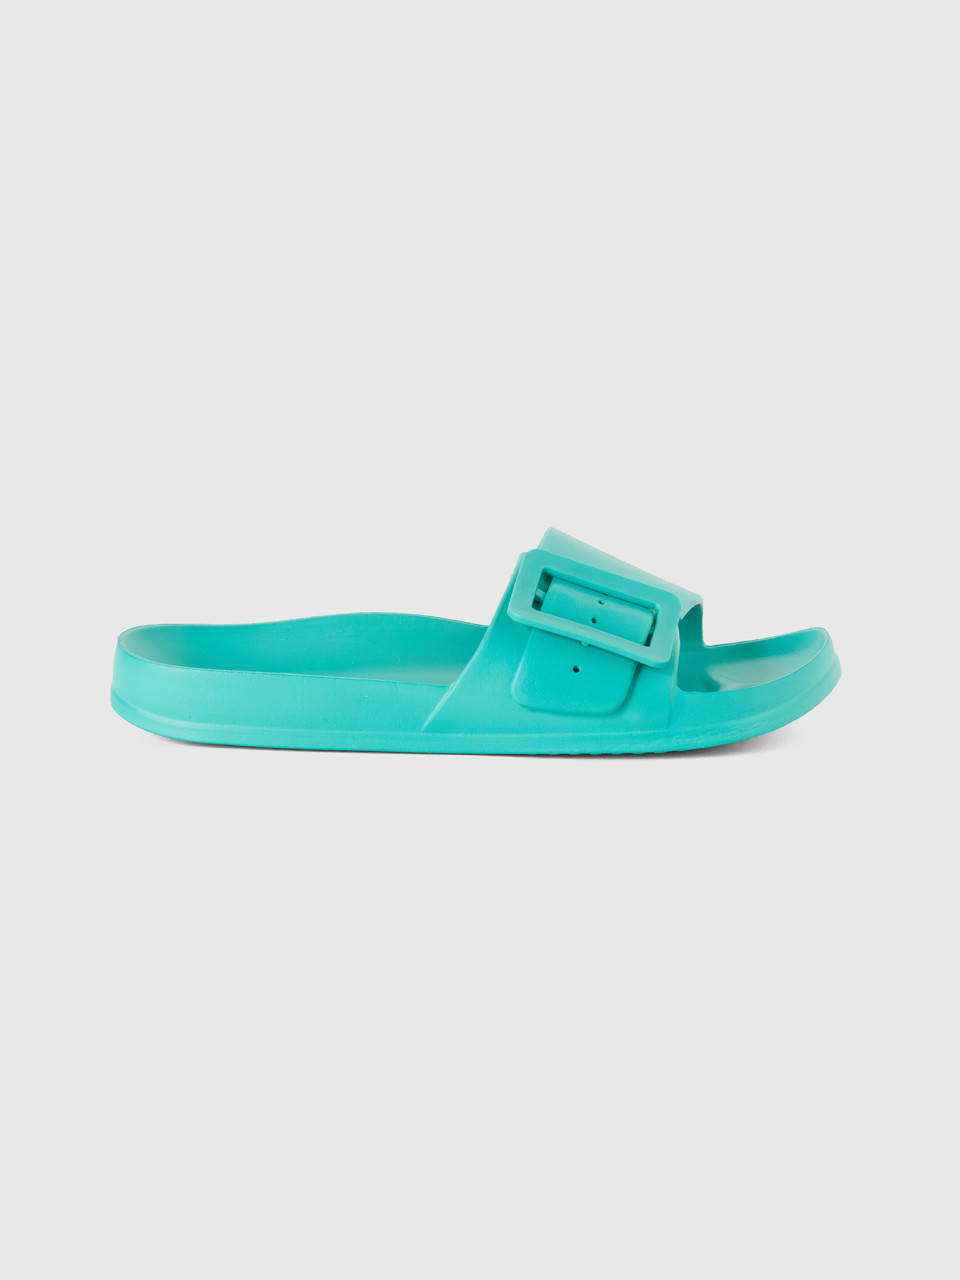 Benetton, Sandals With Band And Buckle,5, Aqua